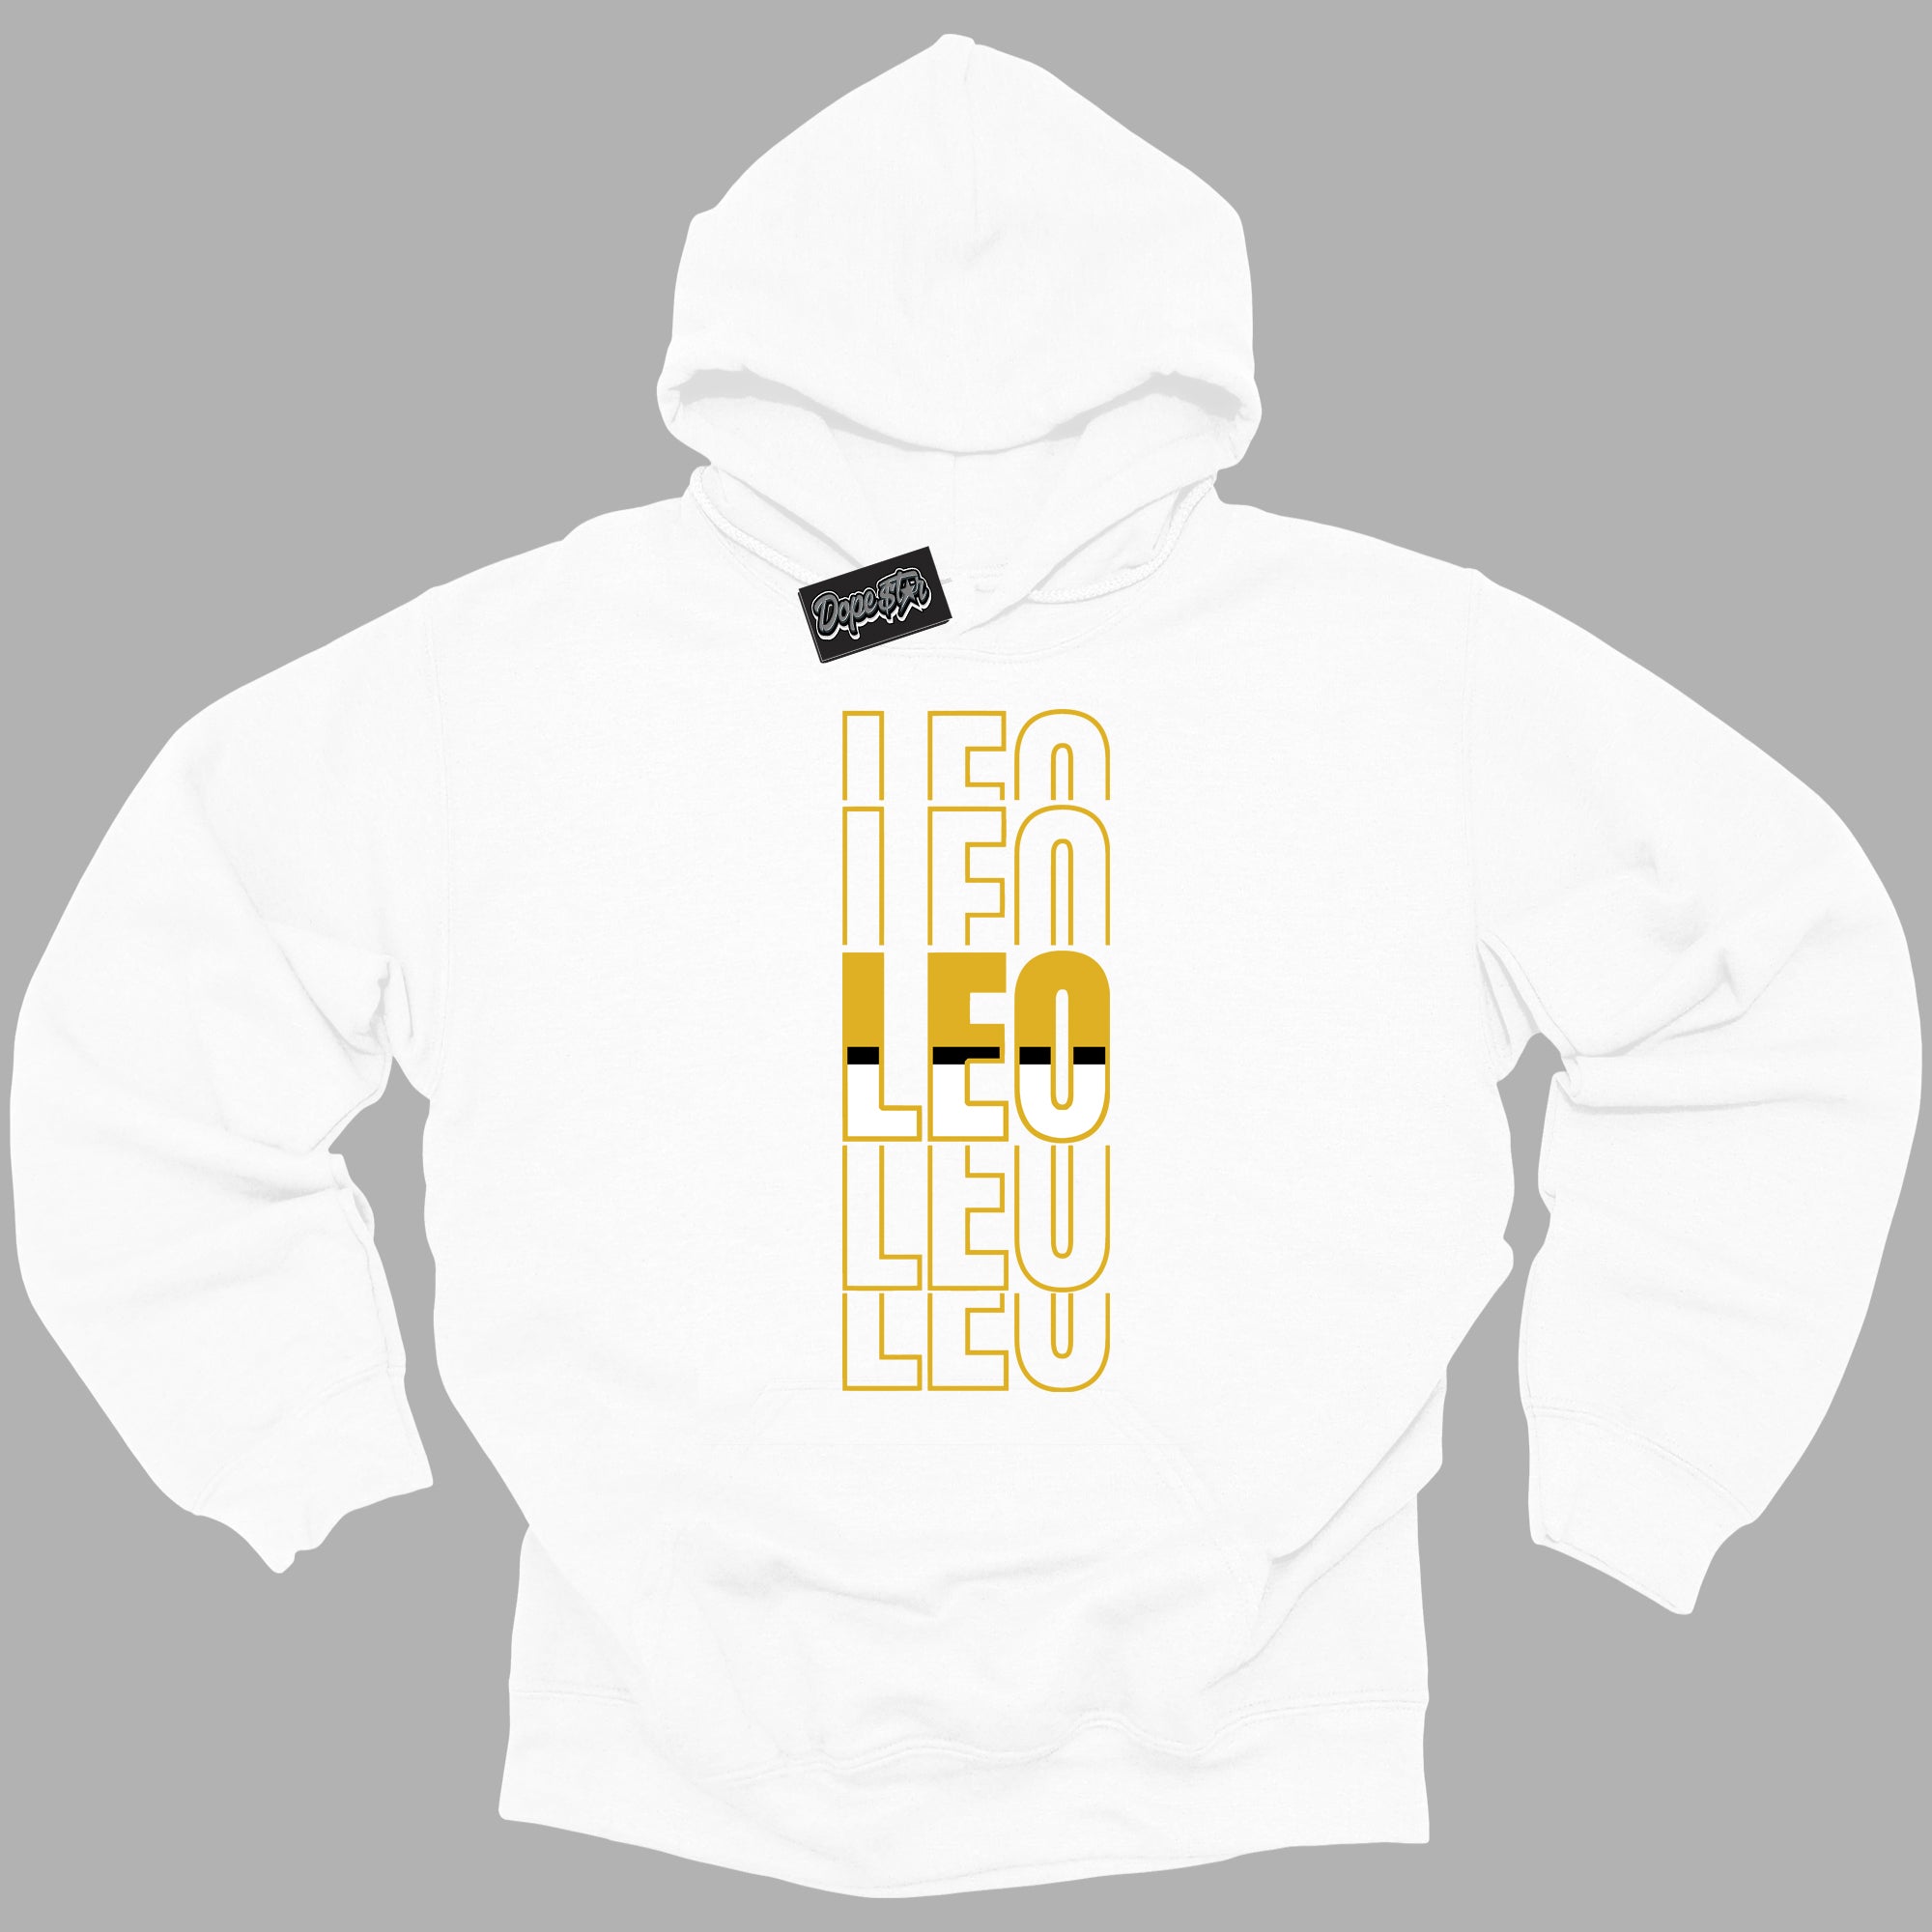 Cool White Hoodie with “ Leo ”  design that Perfectly Matches Yellow Ochre 6s Sneakers.